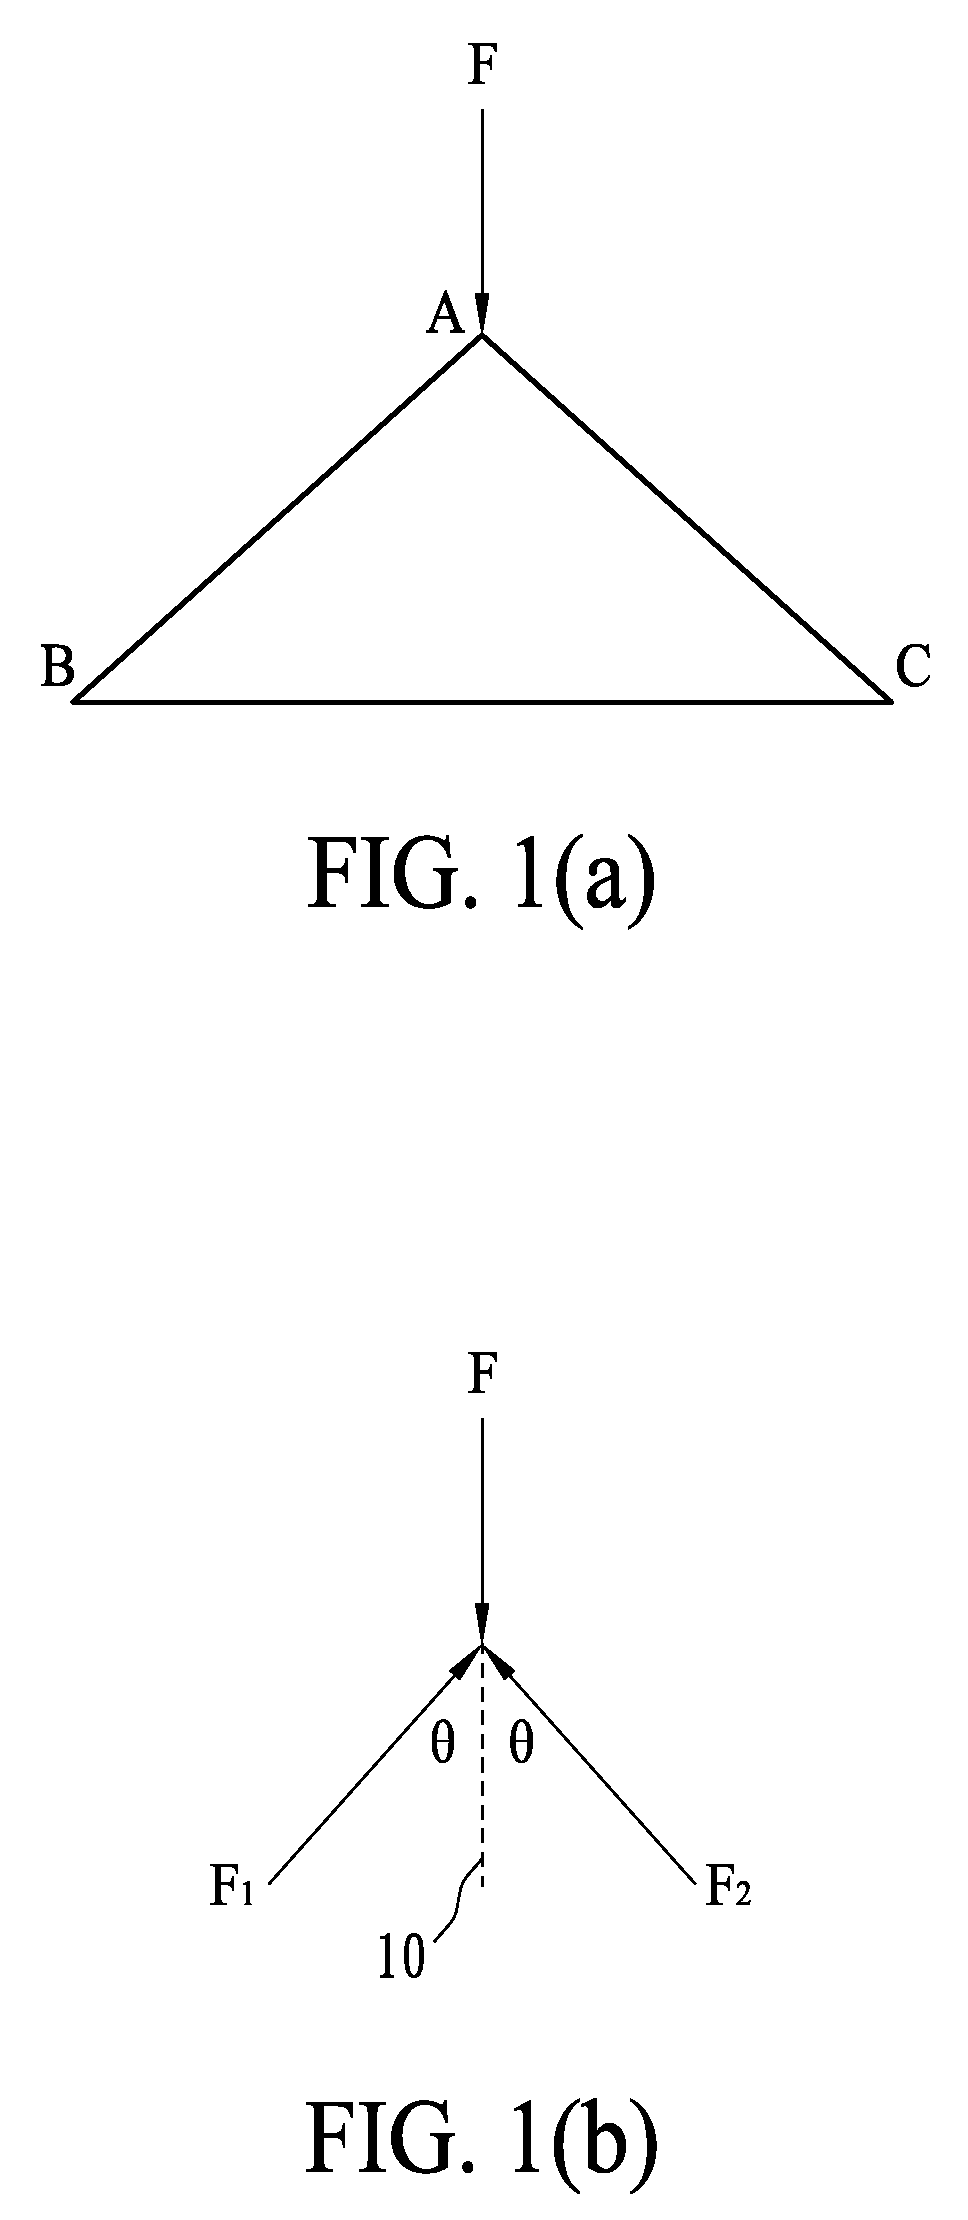 Portable electronic apparatus and housing thereof